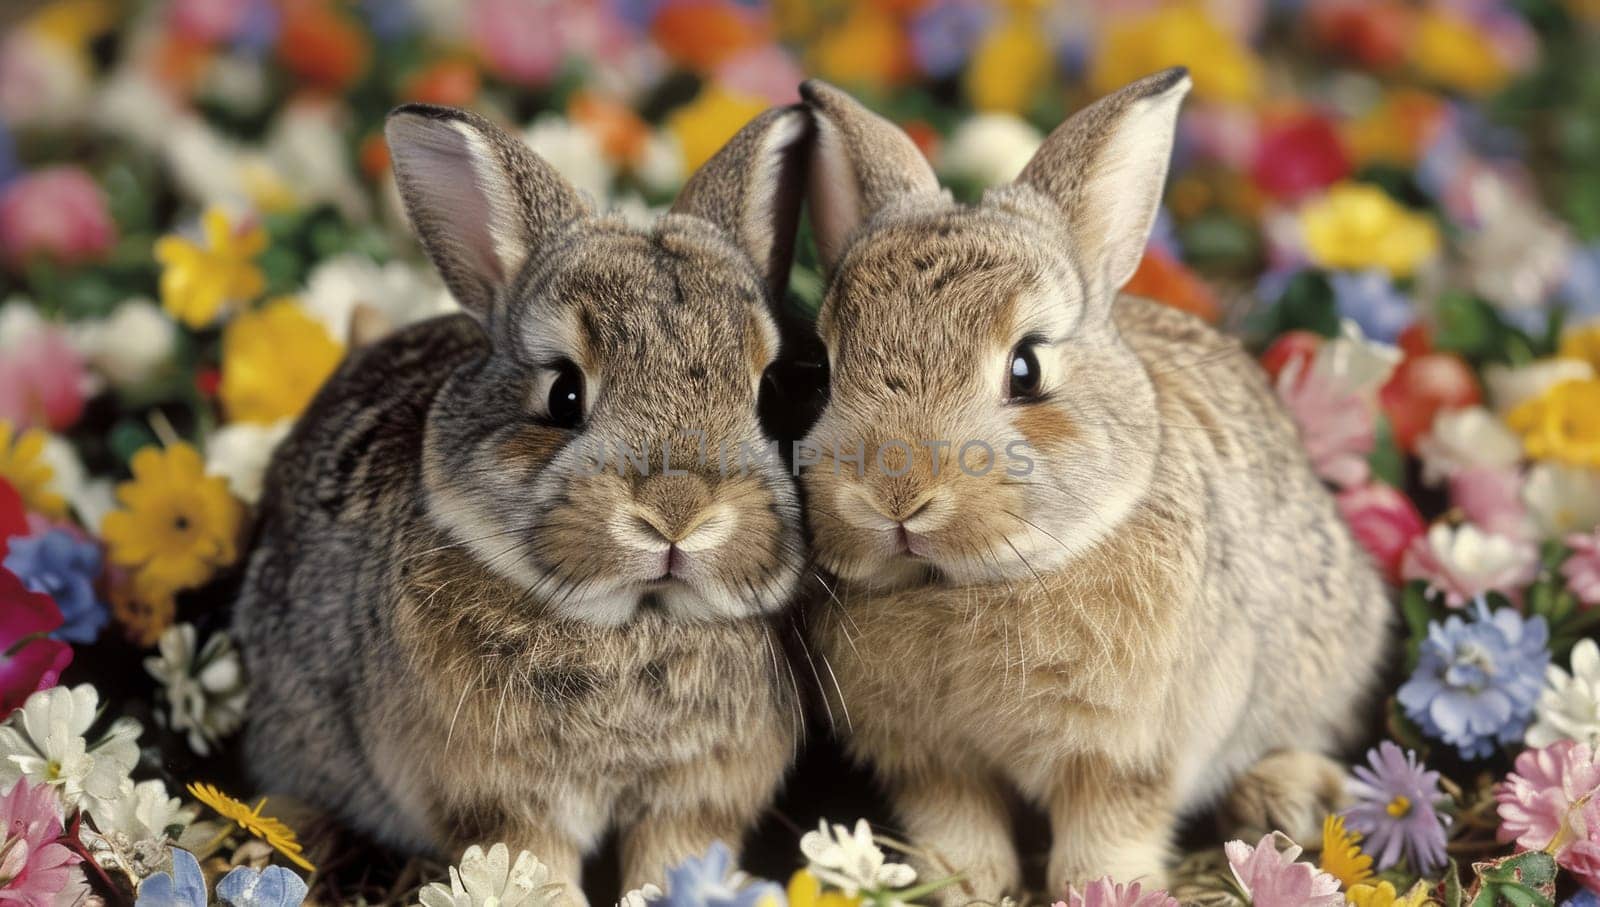 Two adorable rabbits snuggling in a field of colorful flowers